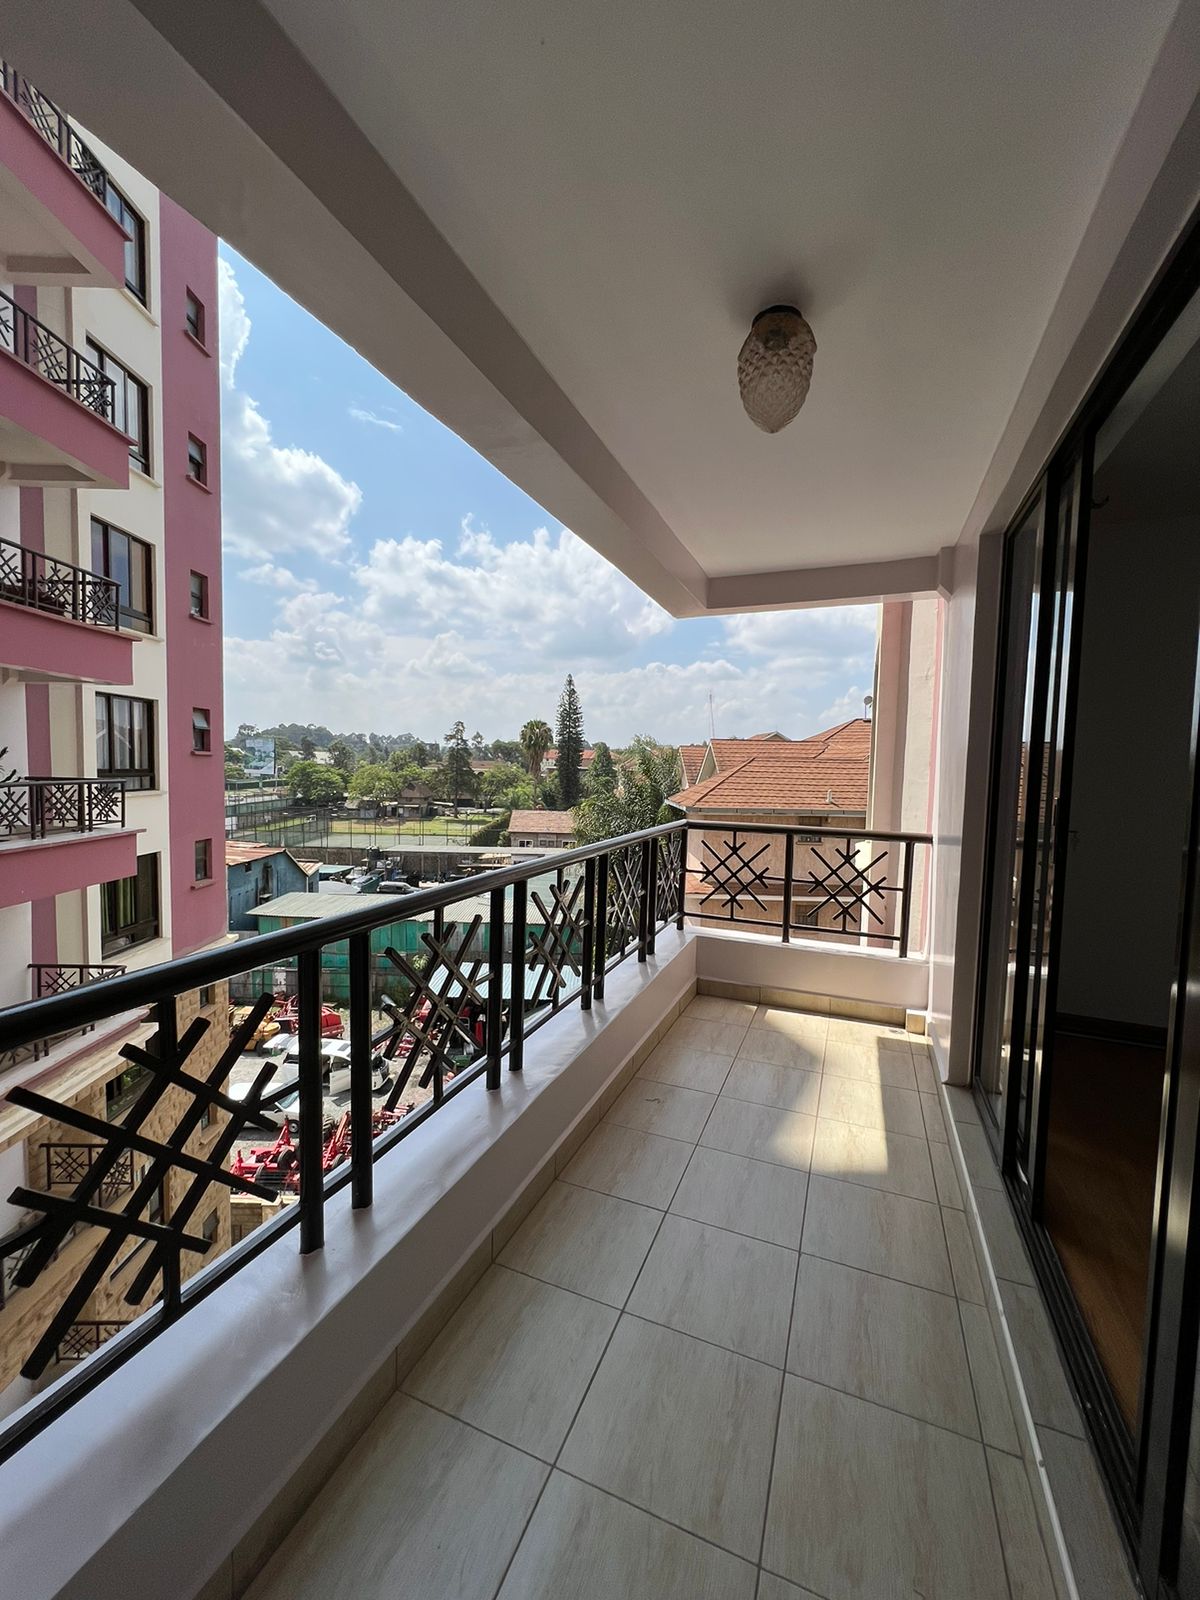 2 bedroom apartment to let located on ngong rd. Musilli Homes